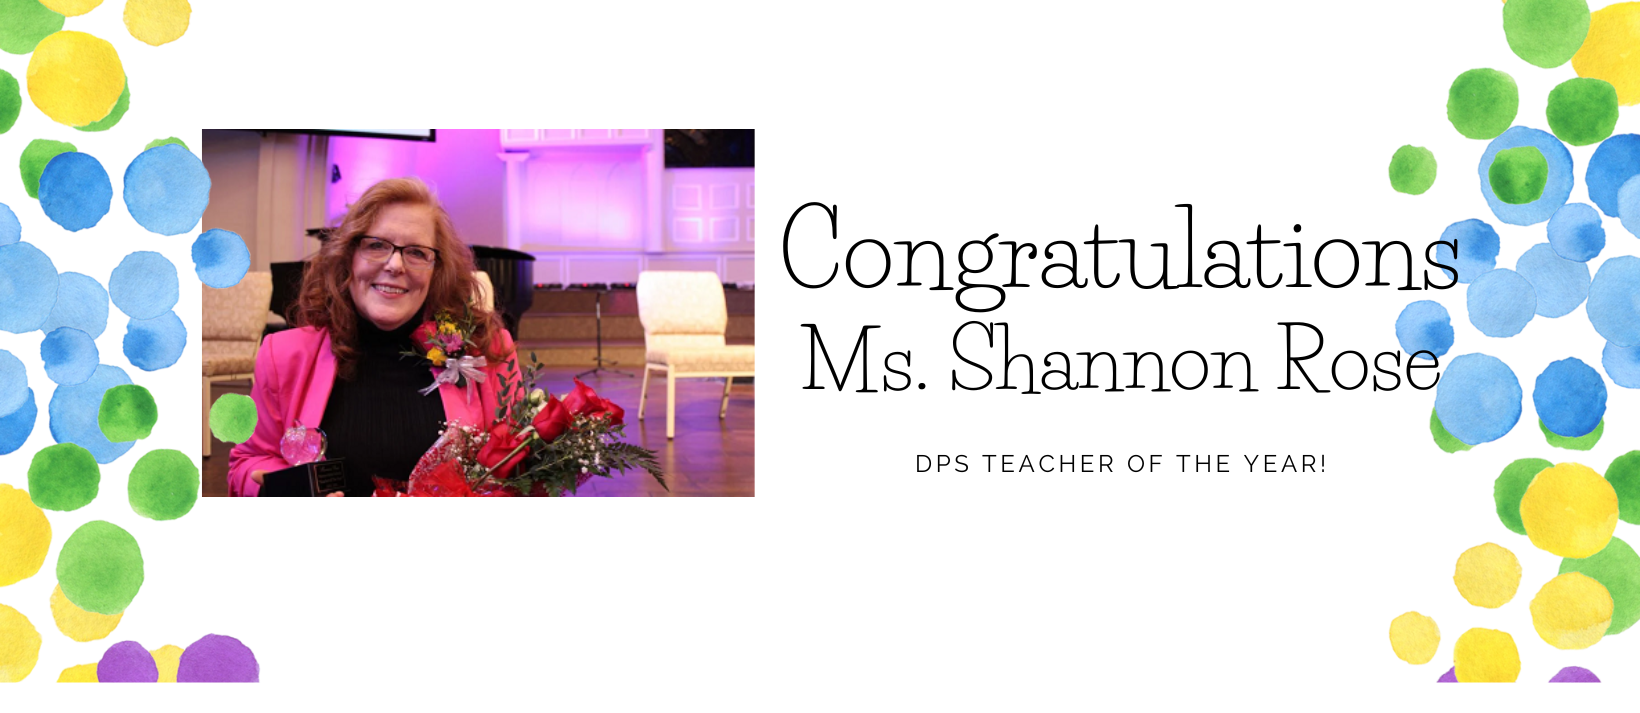 Pic of DPS Teacher of the Year!